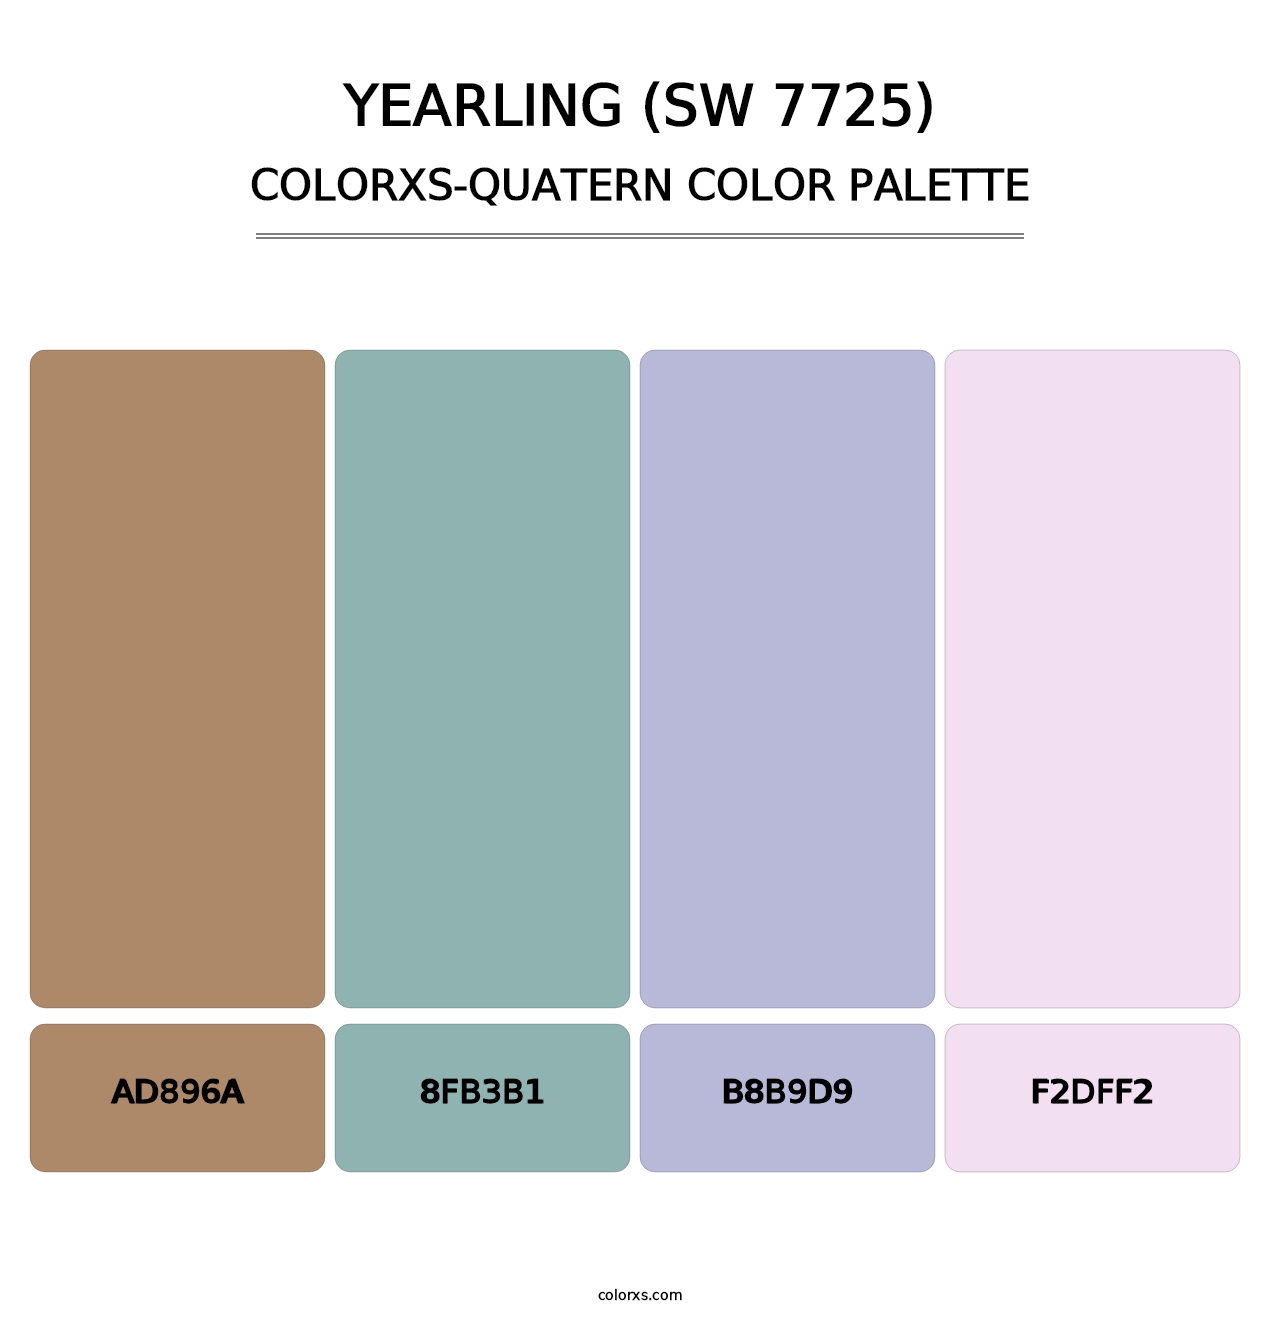 Yearling (SW 7725) - Colorxs Quatern Palette